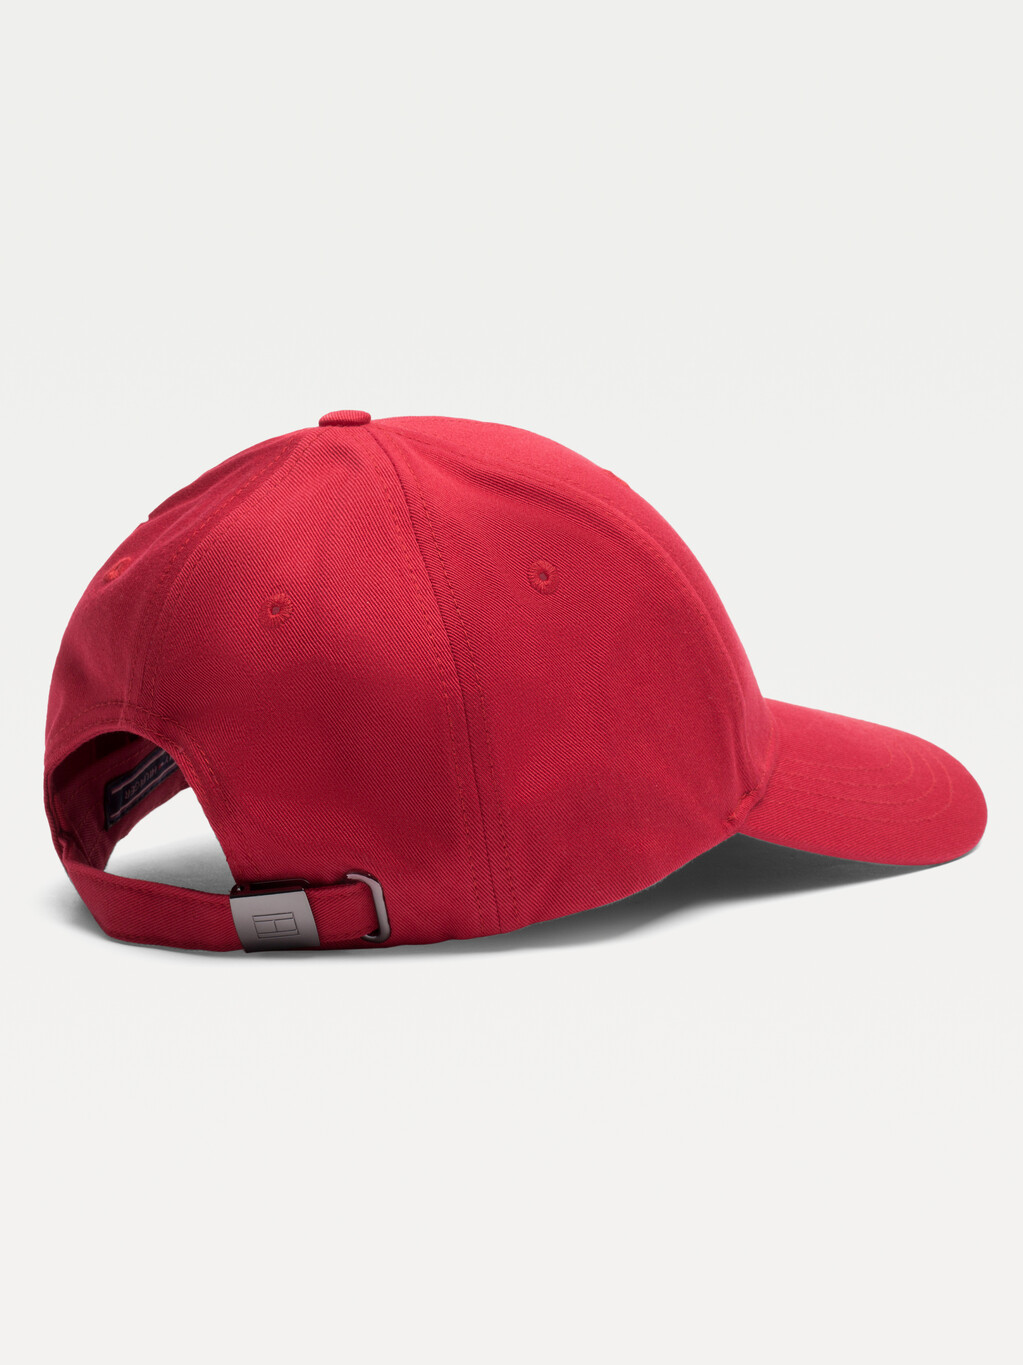 Buy CLASSIC BASEBALL CAP in color APPLE RED